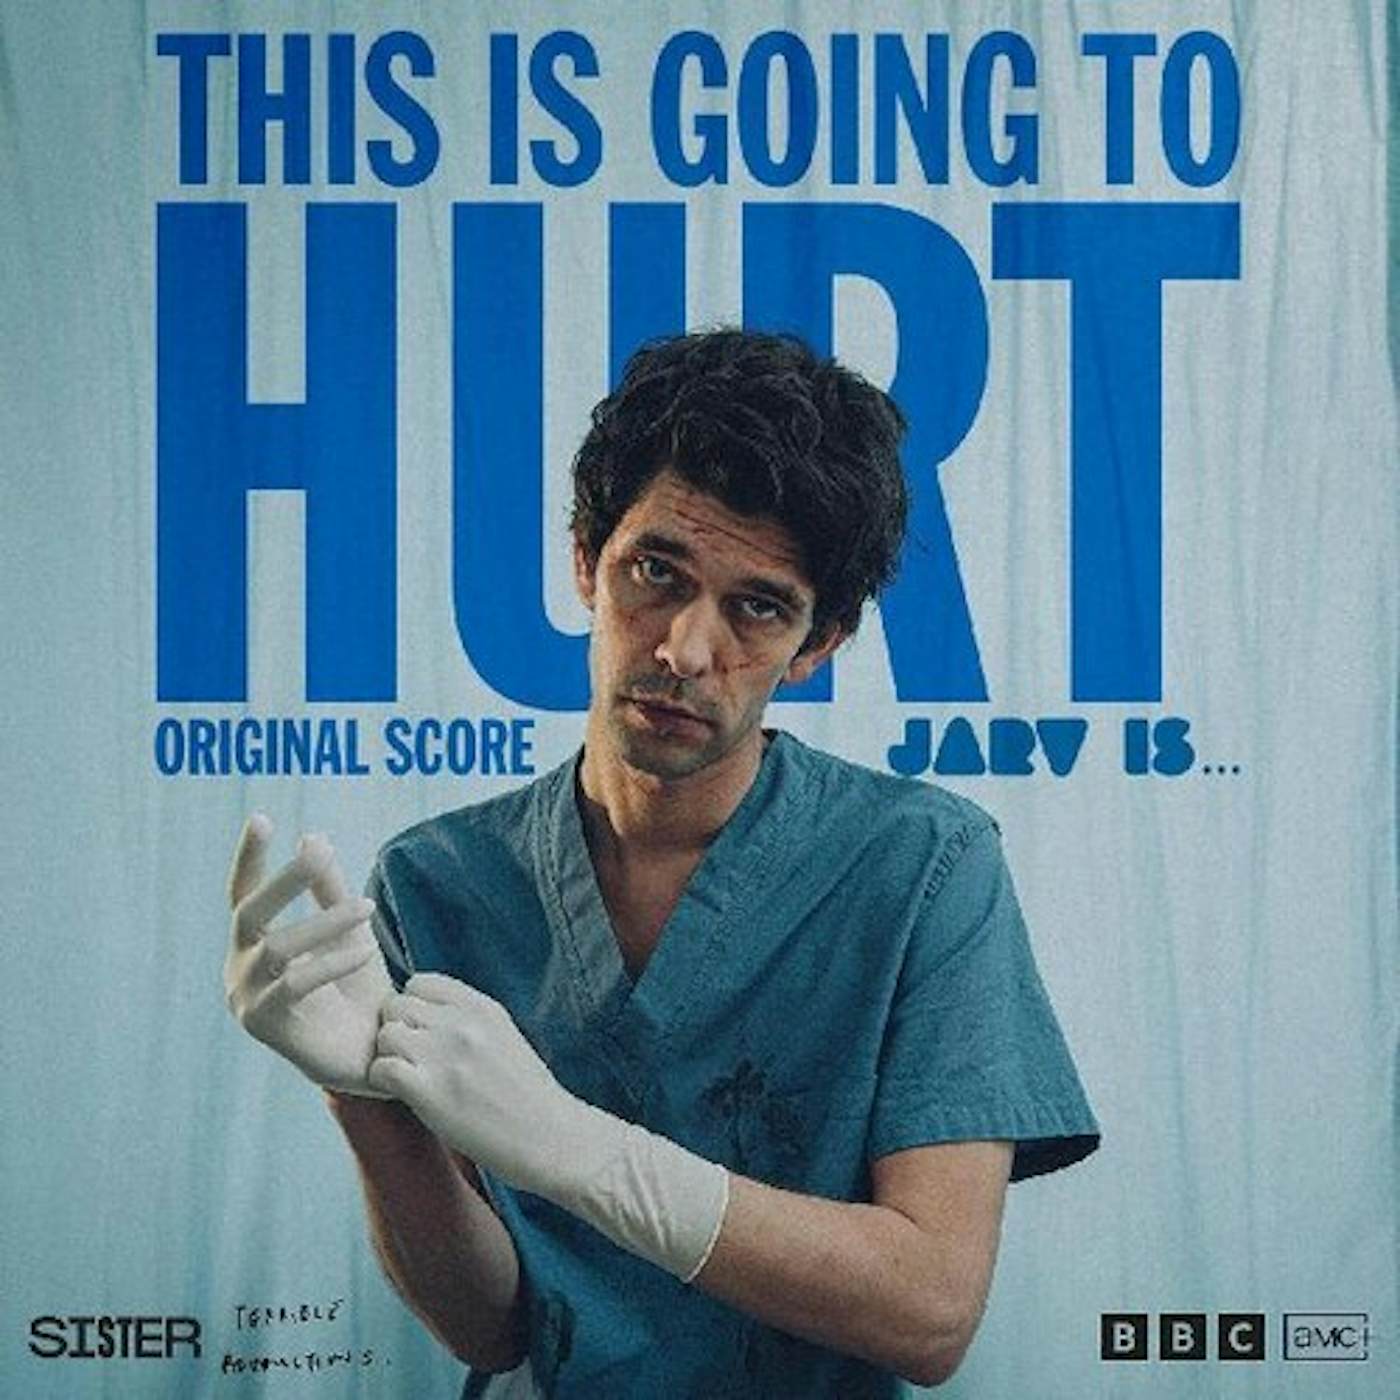 JARV IS... This Is Going To Hurt (Original Soundtrack) Vinyl Record